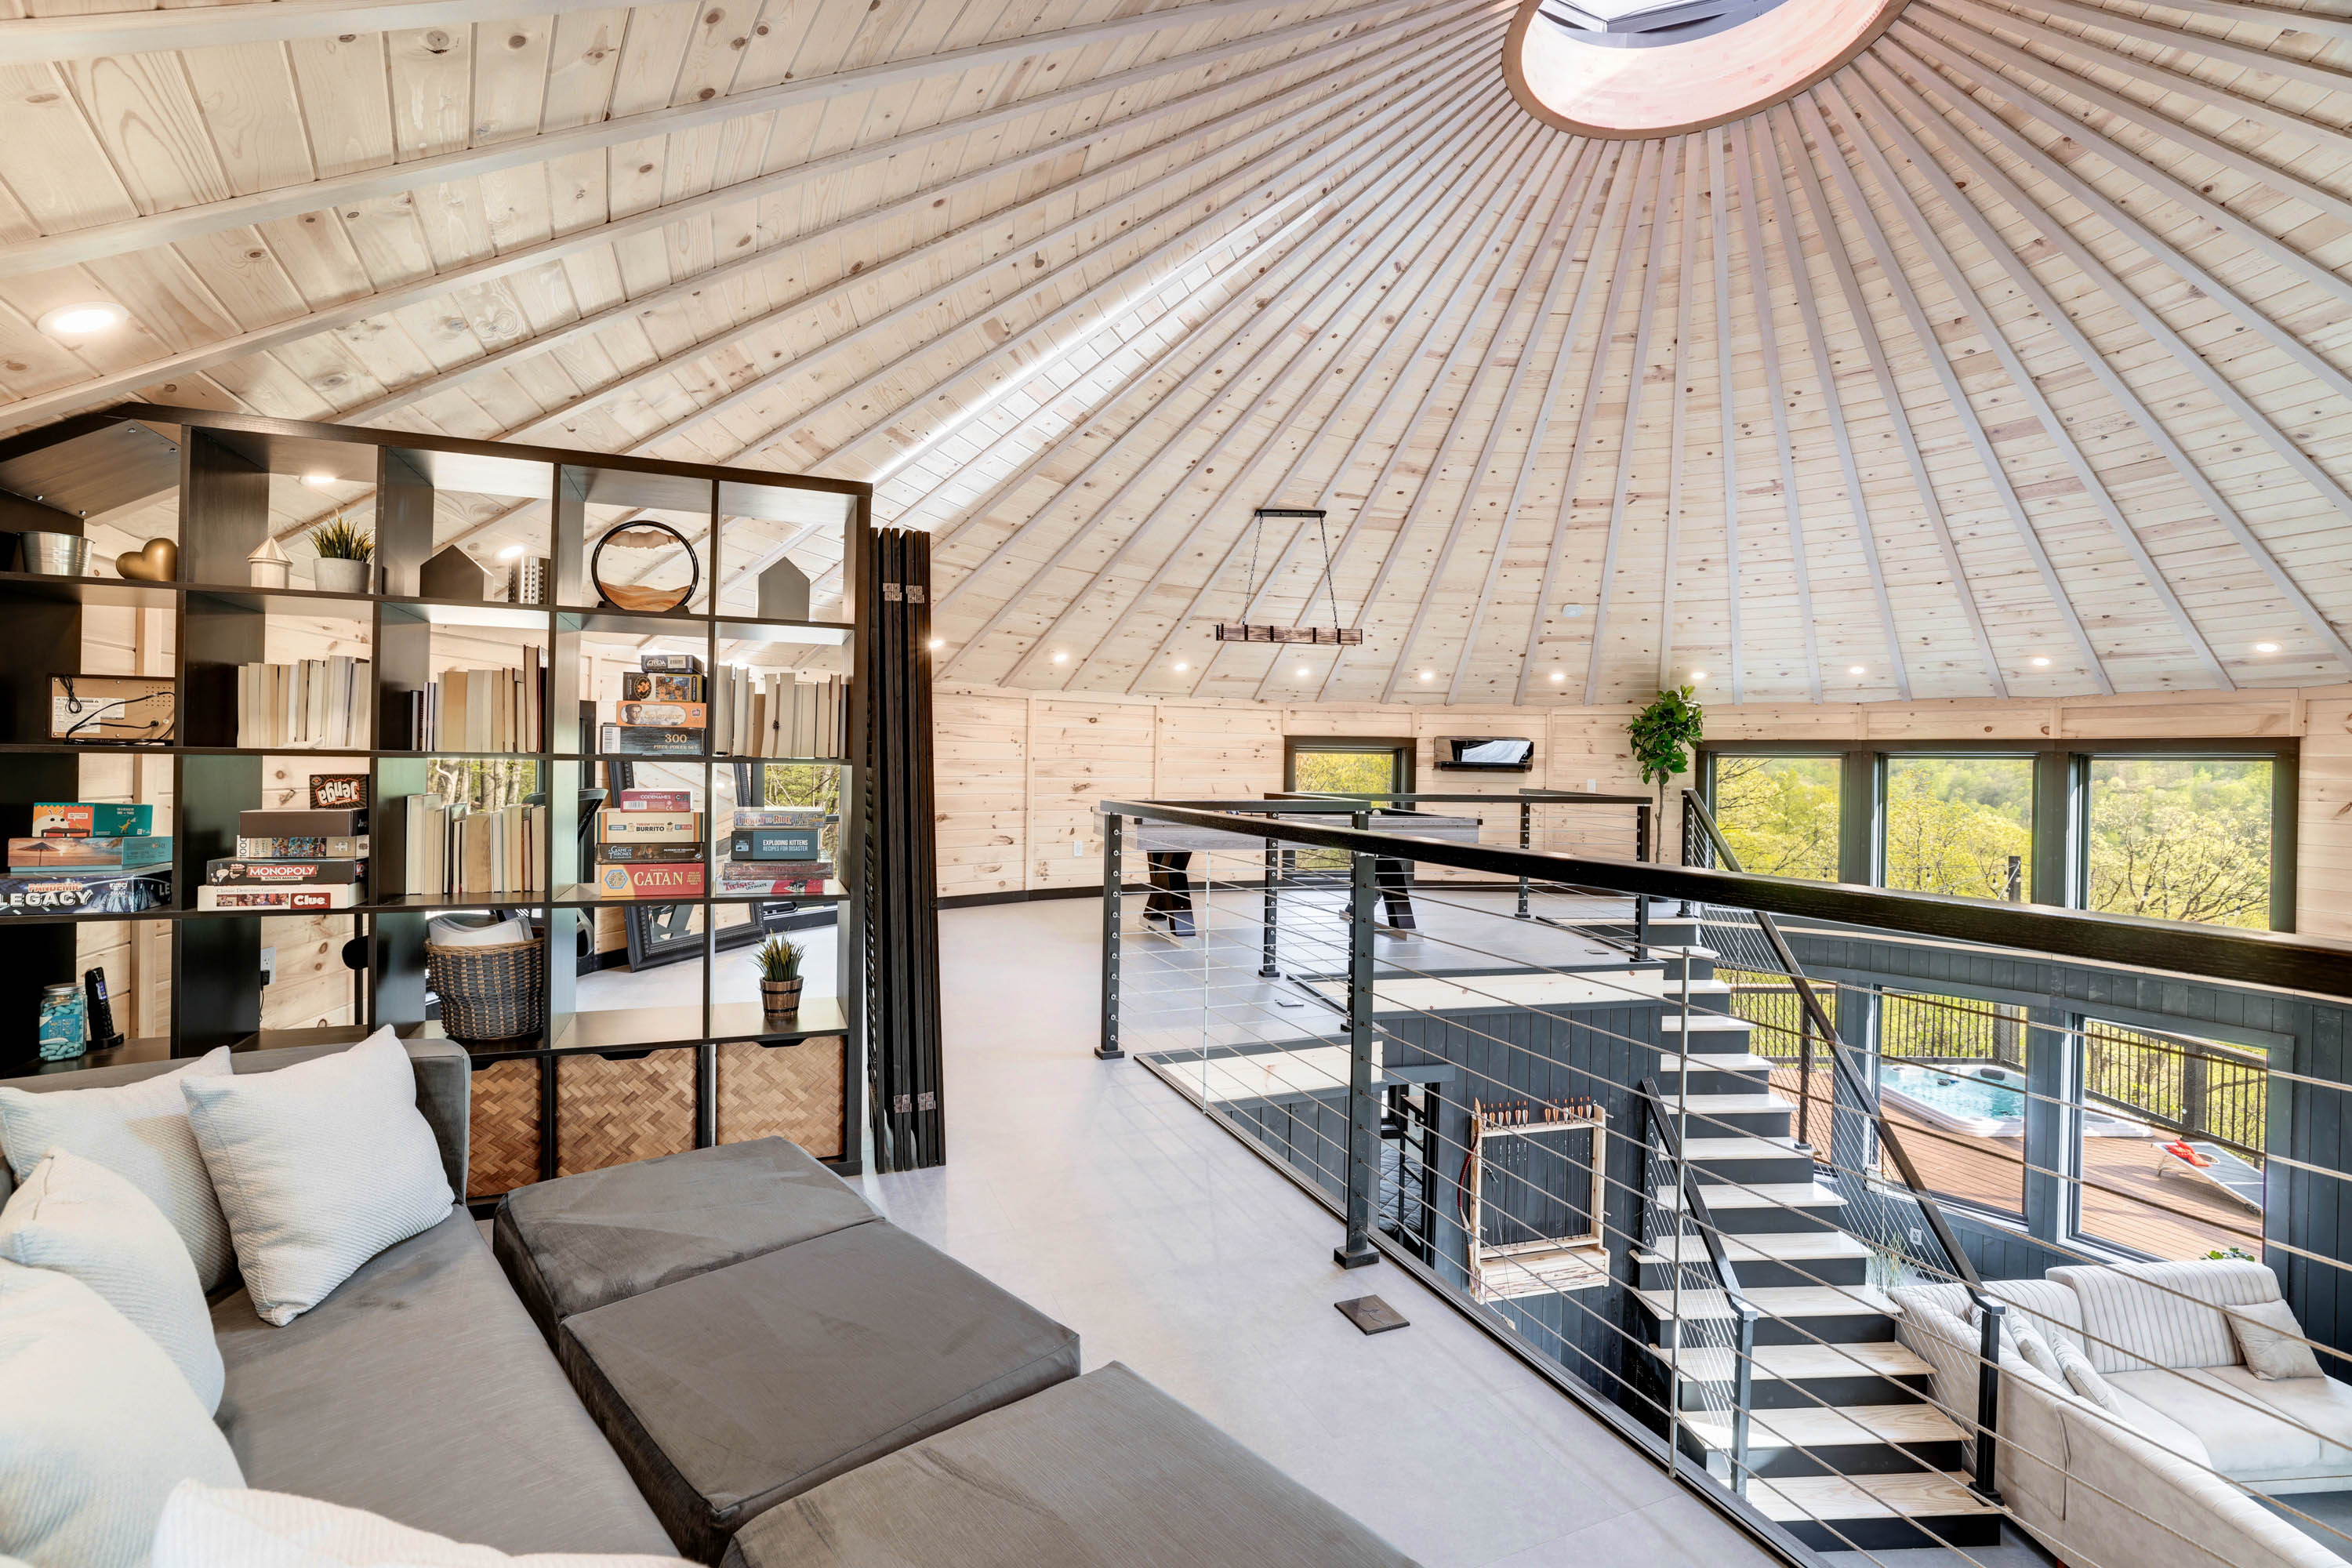 <span  class="uc_style_uc_tiles_grid_image_elementor_uc_items_attribute_title" style="color:#ffffff;">Spacious Loft with King-Size Sleeper Sofa, Bookshelf, Board Games, Pool Table - Skyline Yurt</span>